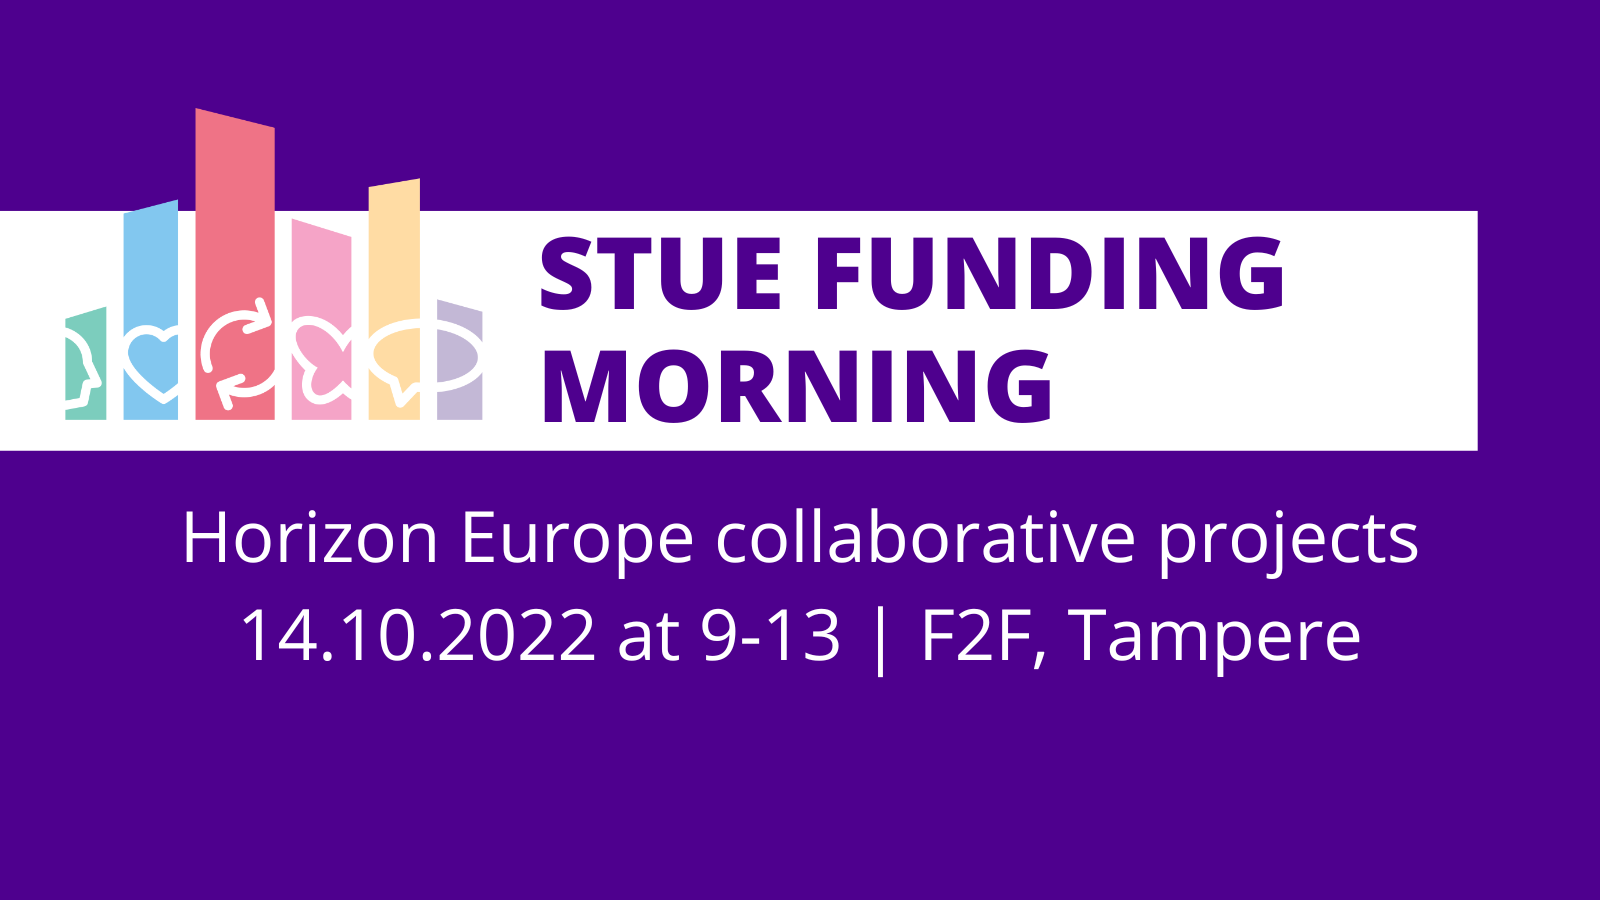 STUE Funding Morning on 14.10.2022.